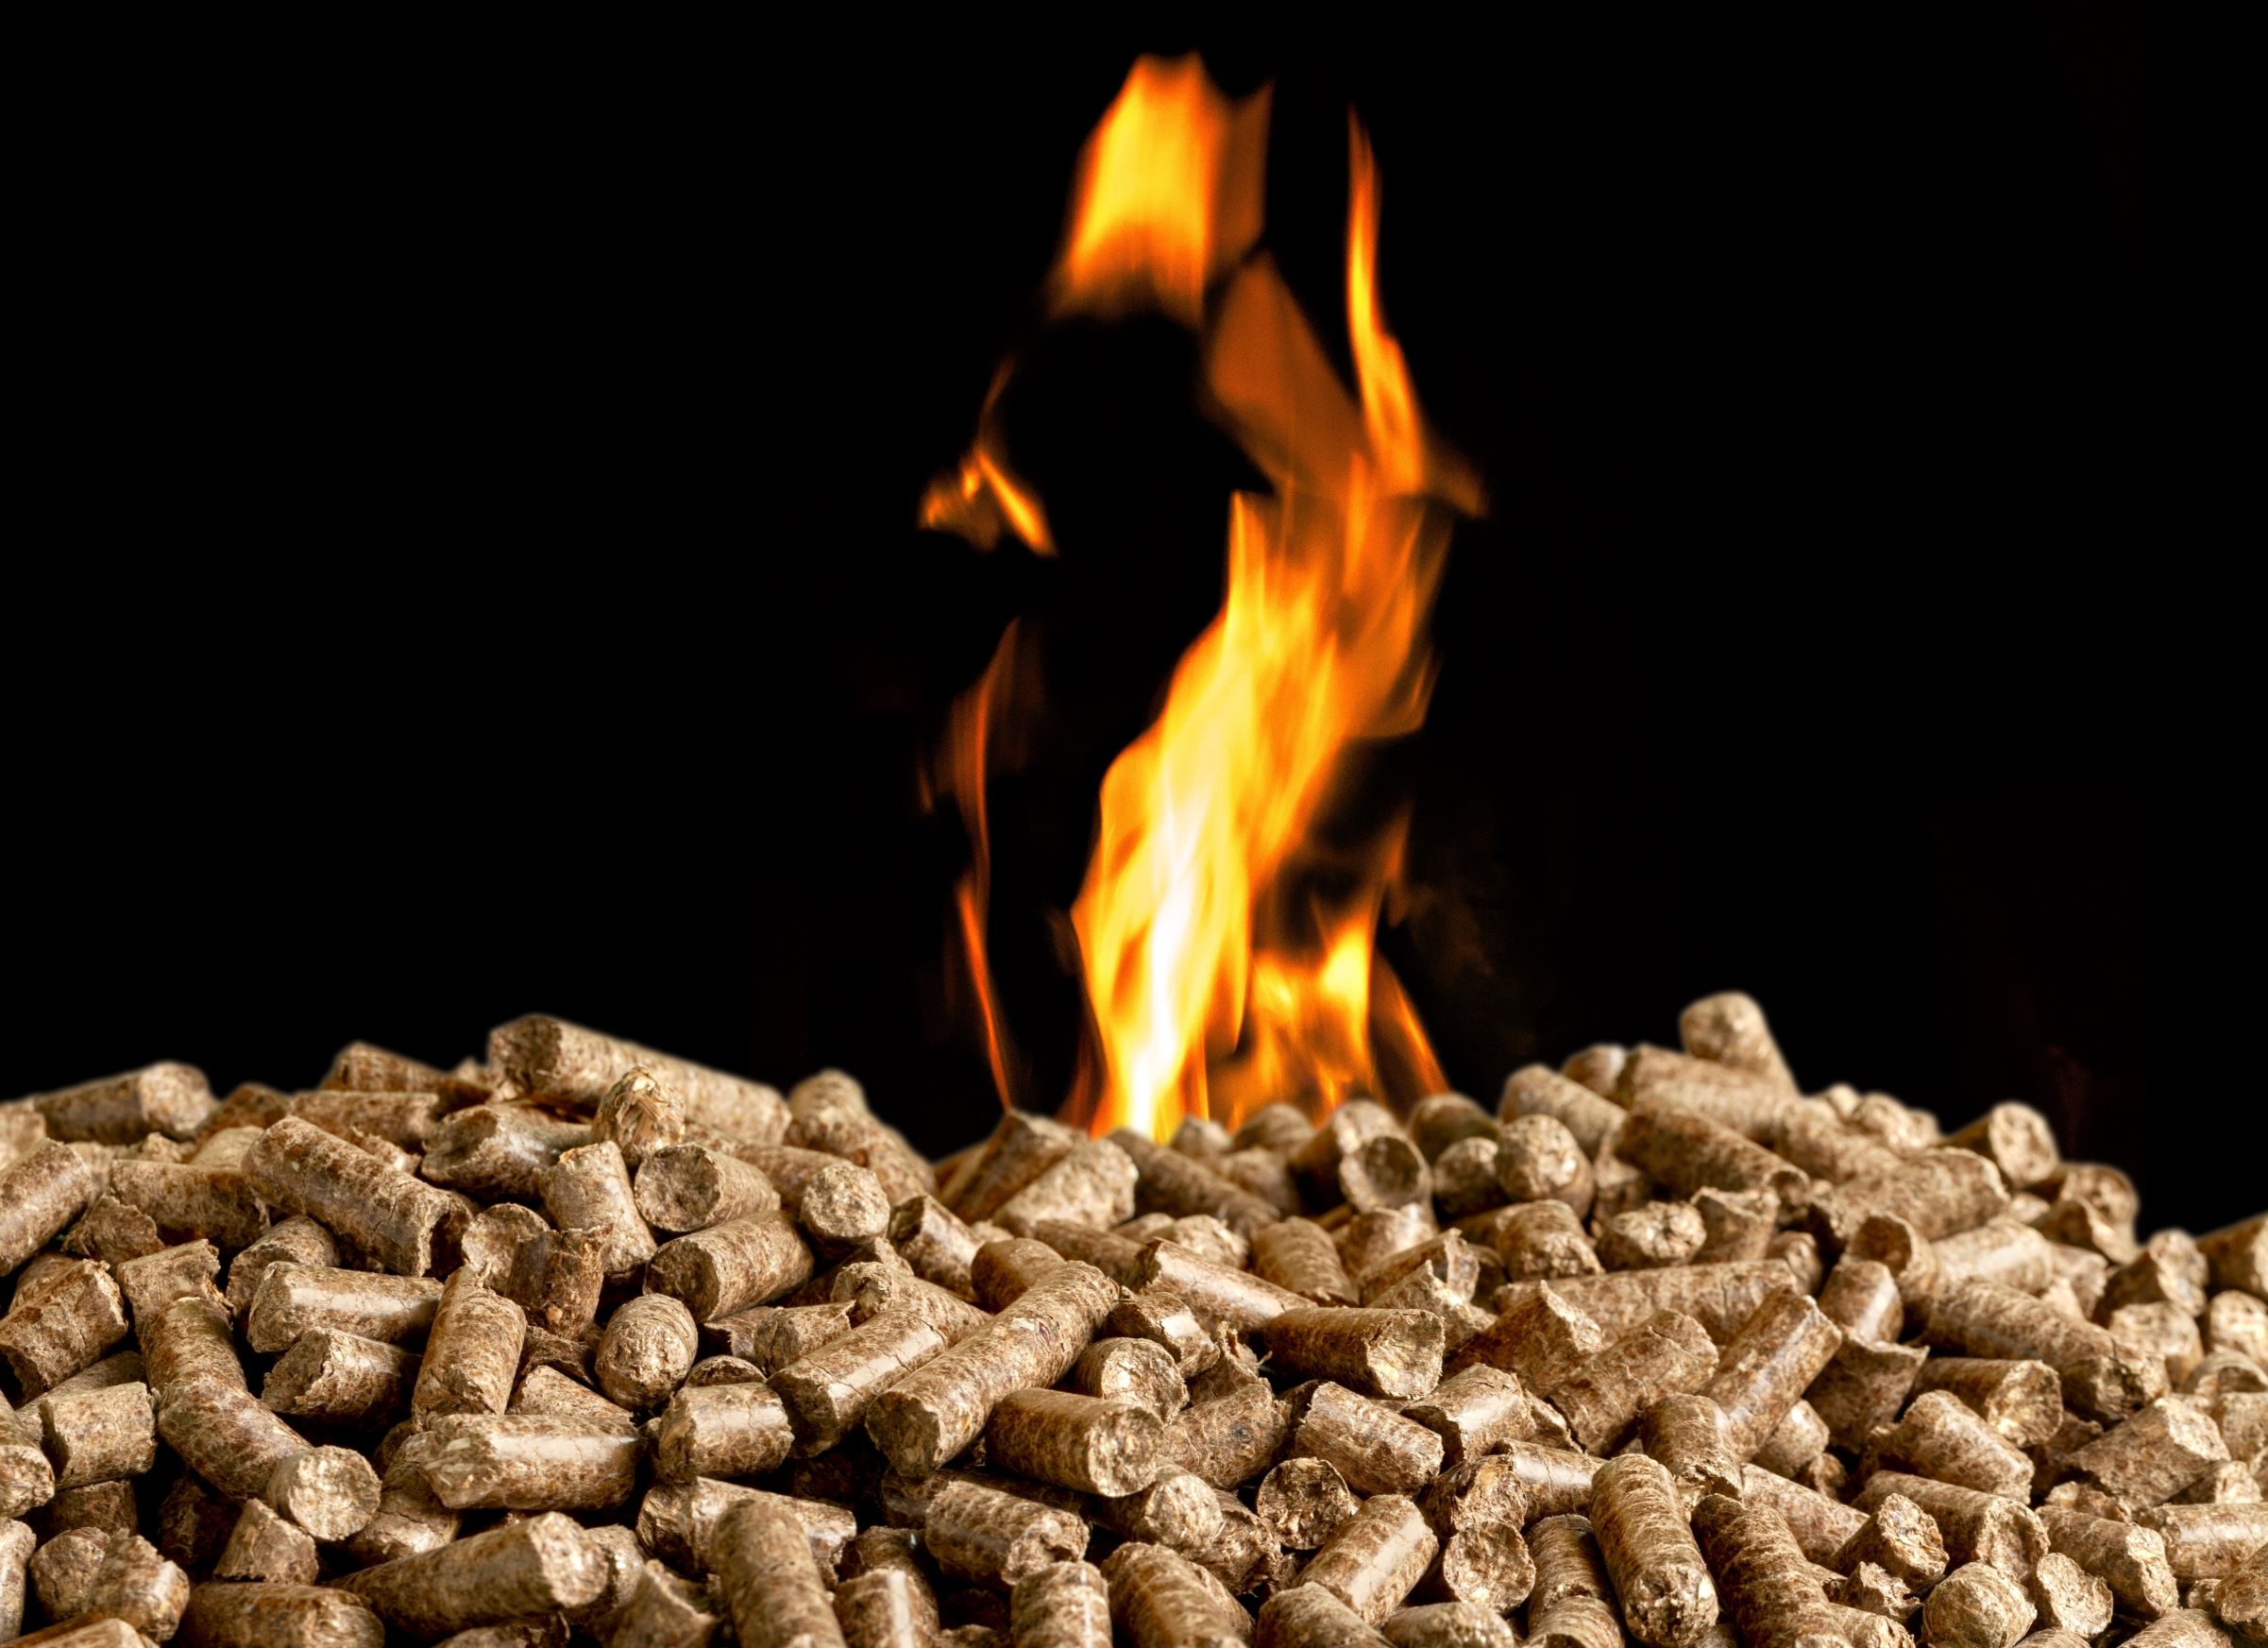 bioenergy is produced by burning wood pellets like these